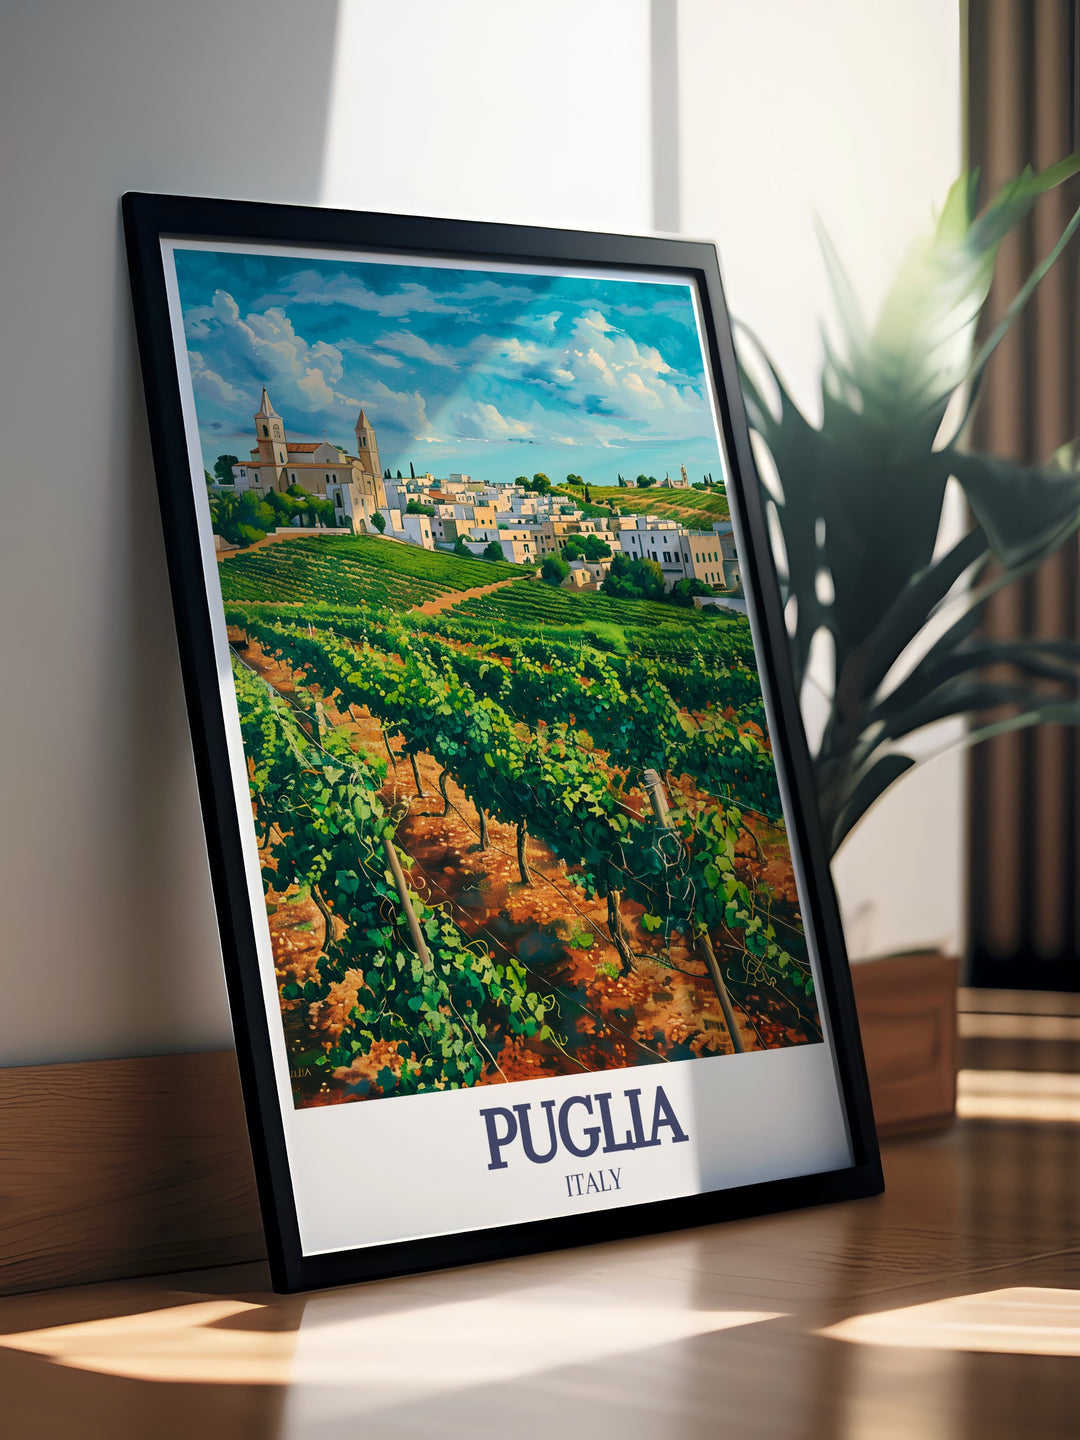 Enhance your home with our Salento Modern Prints. This Italy Travel Print showcases the beauty of Salento vineyards and Puglia, offering a contemporary touch to any living space. Ideal for those who appreciate fine Italian art.